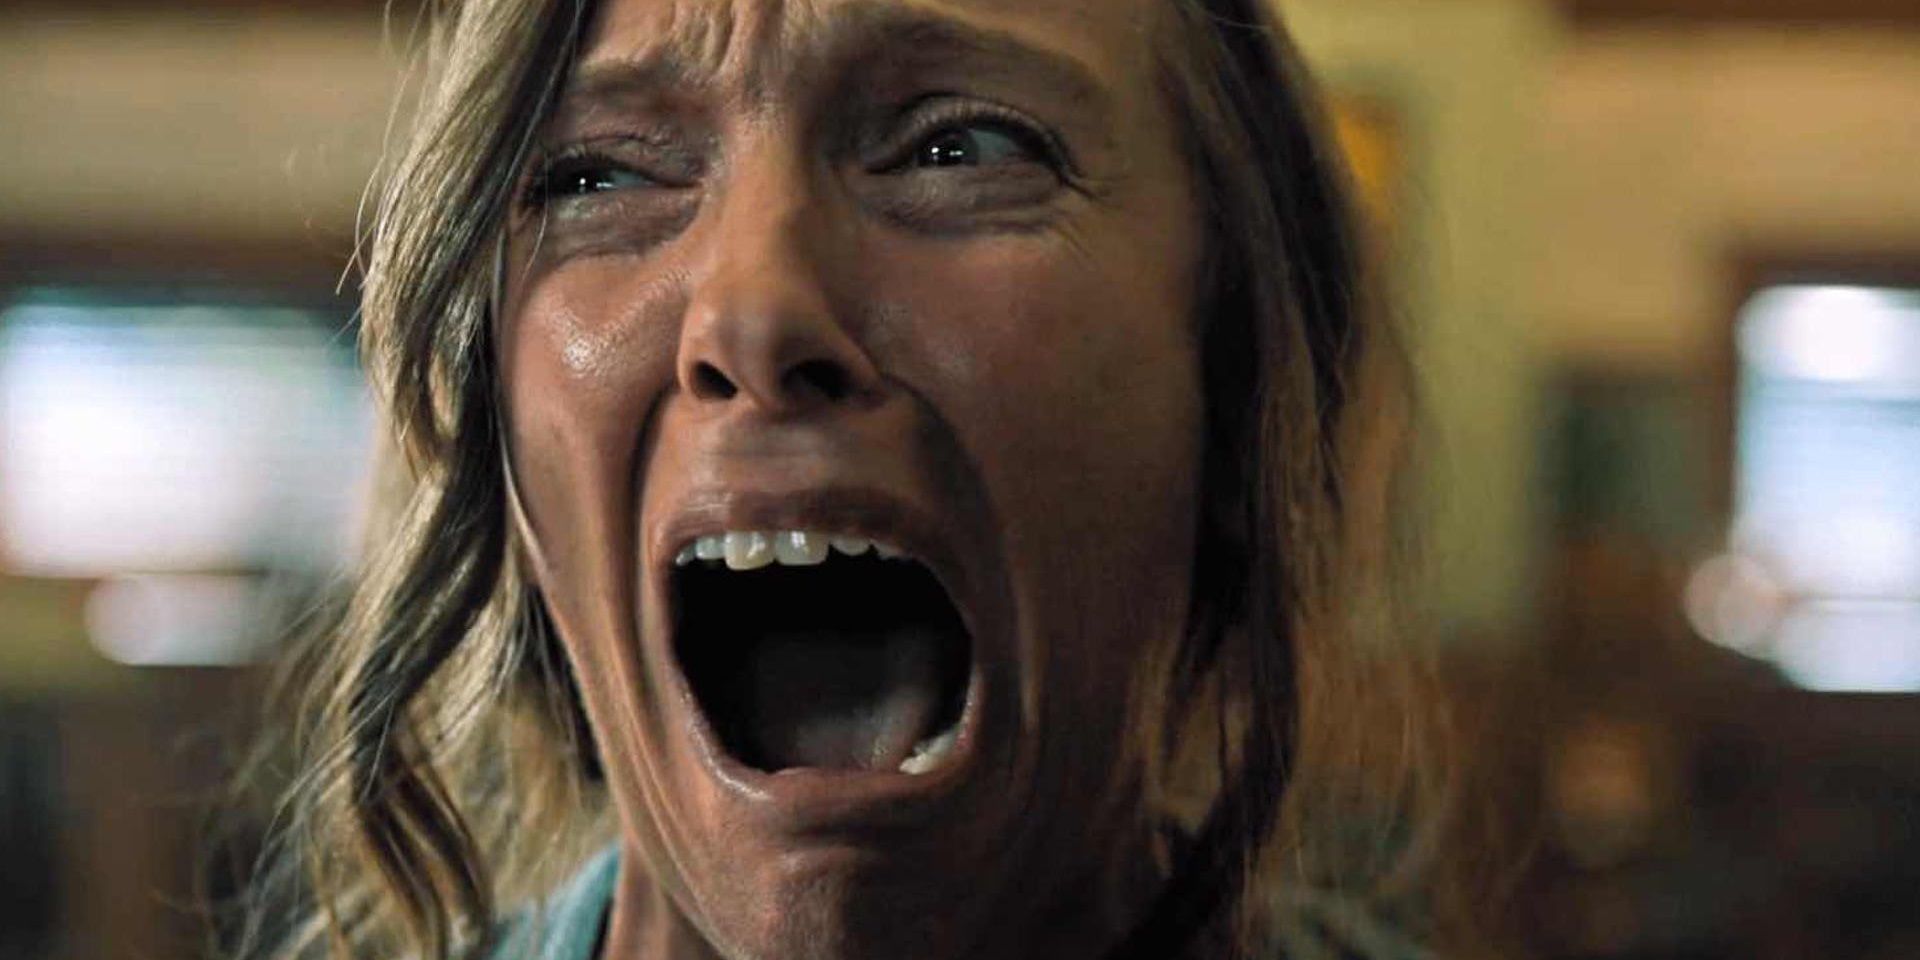 Toni Collette as Annie Graham screaming in Hereditary